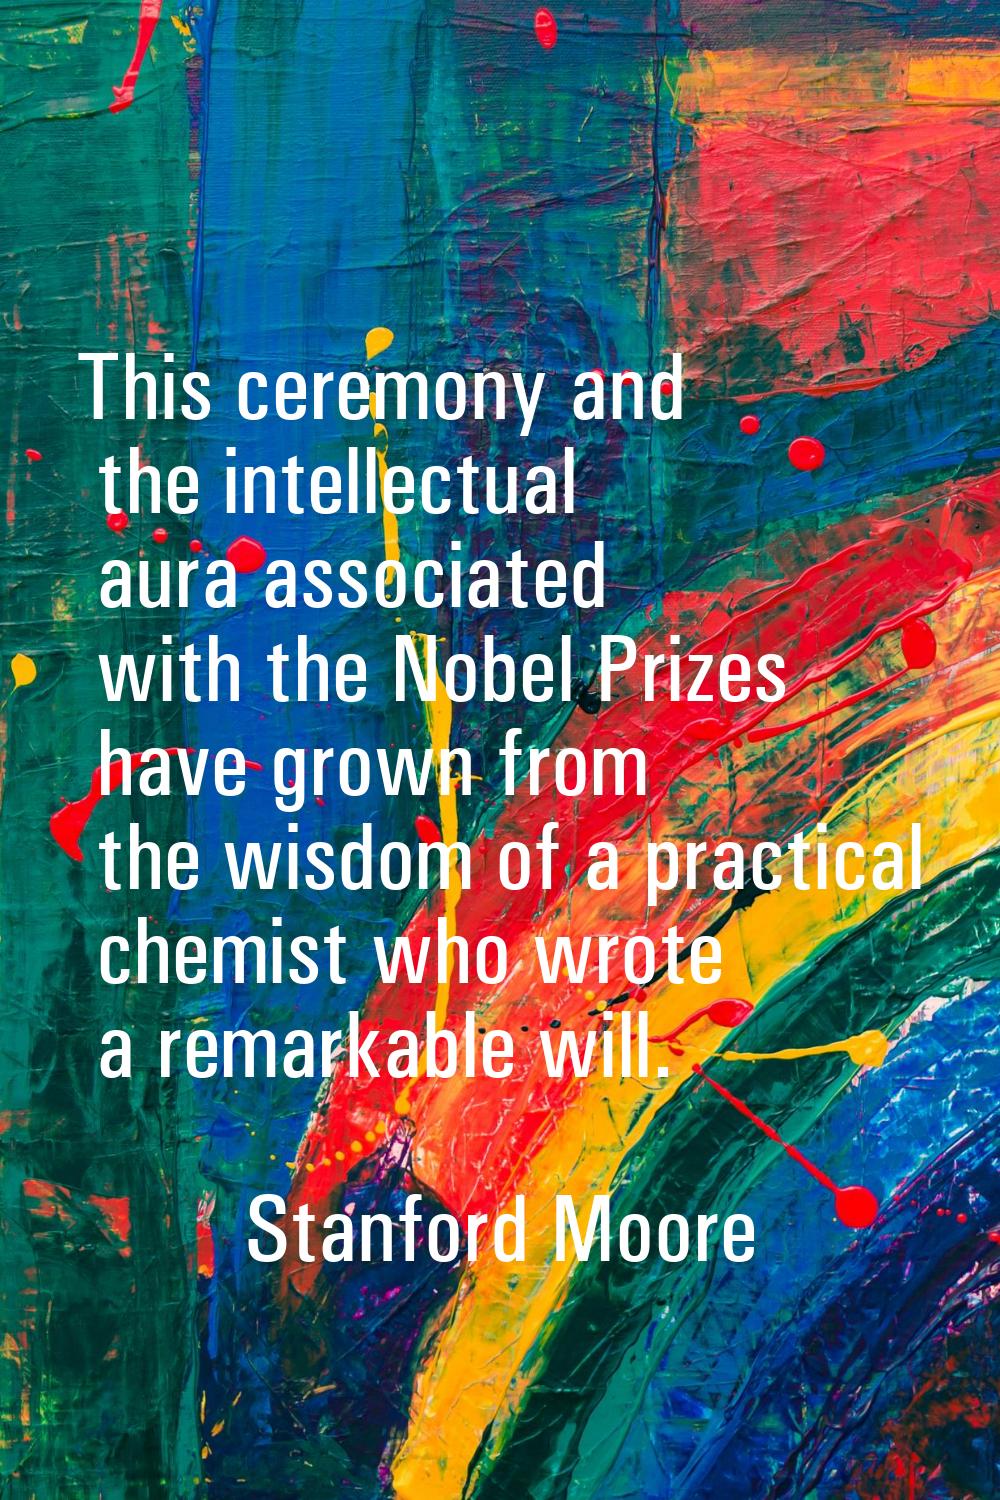 This ceremony and the intellectual aura associated with the Nobel Prizes have grown from the wisdom